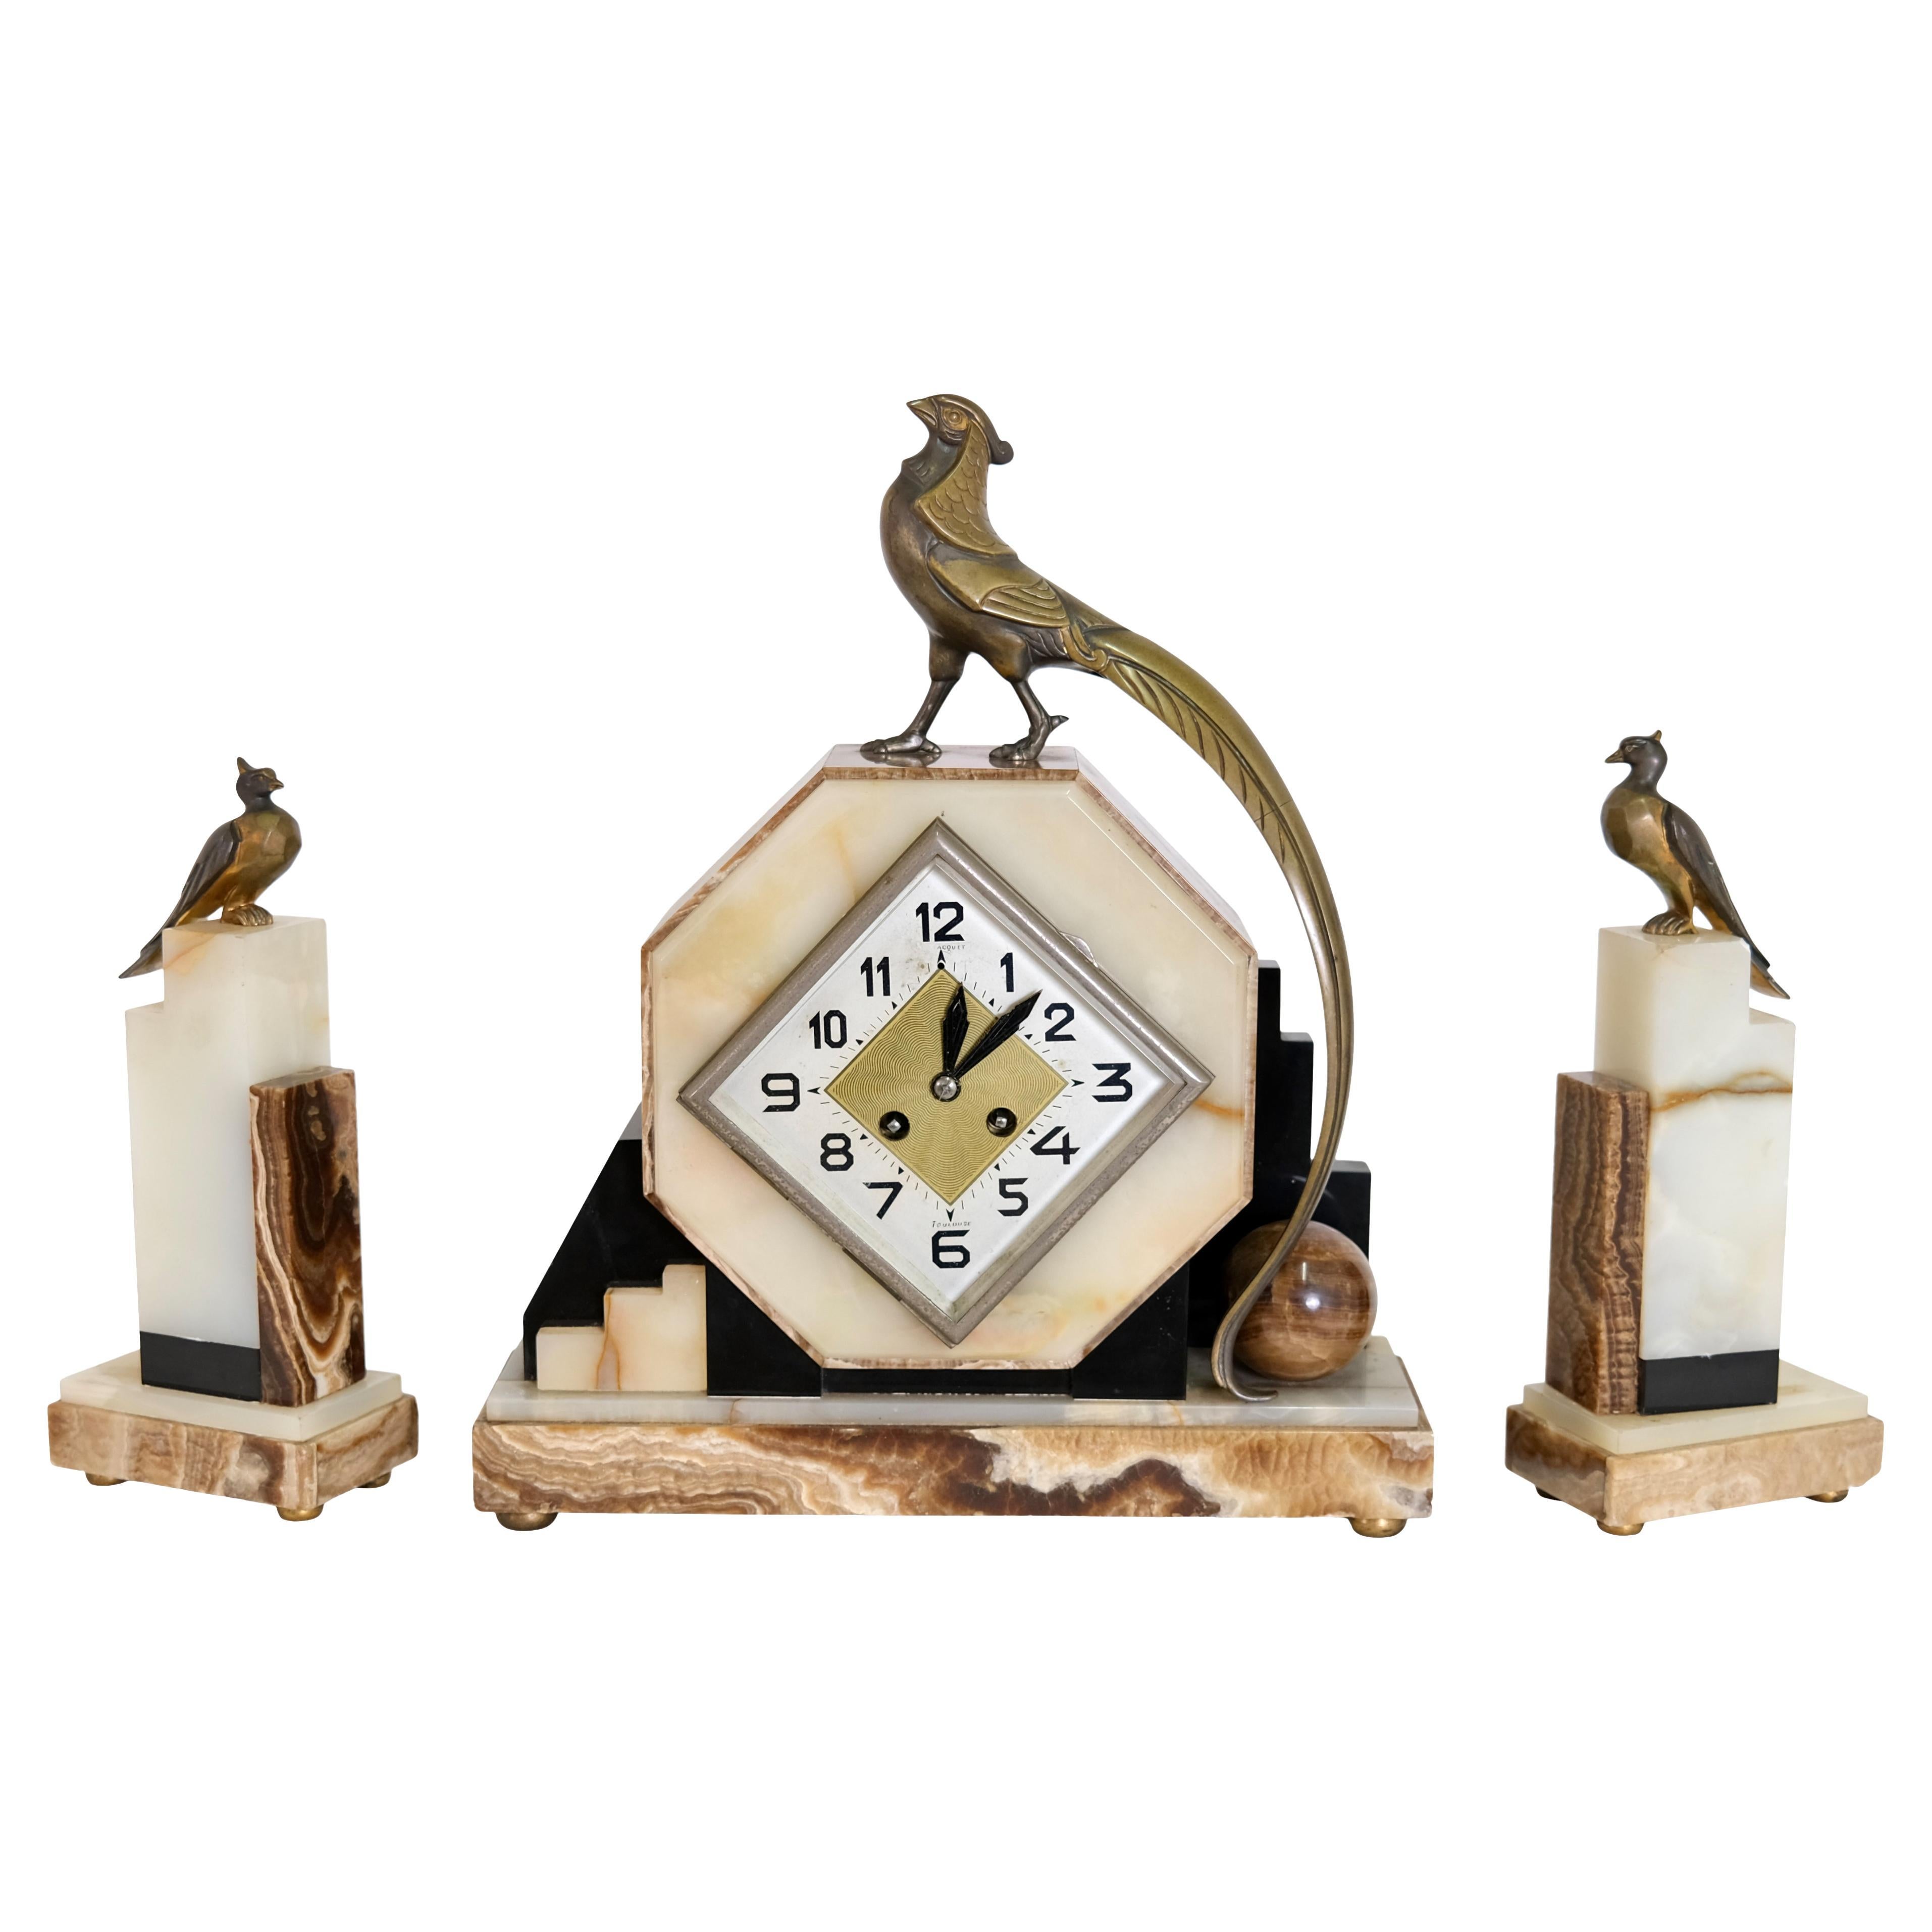 1930s Art Deco Marble Mantel Clock with Bronze Birds by Maurice Frecourt For Sale